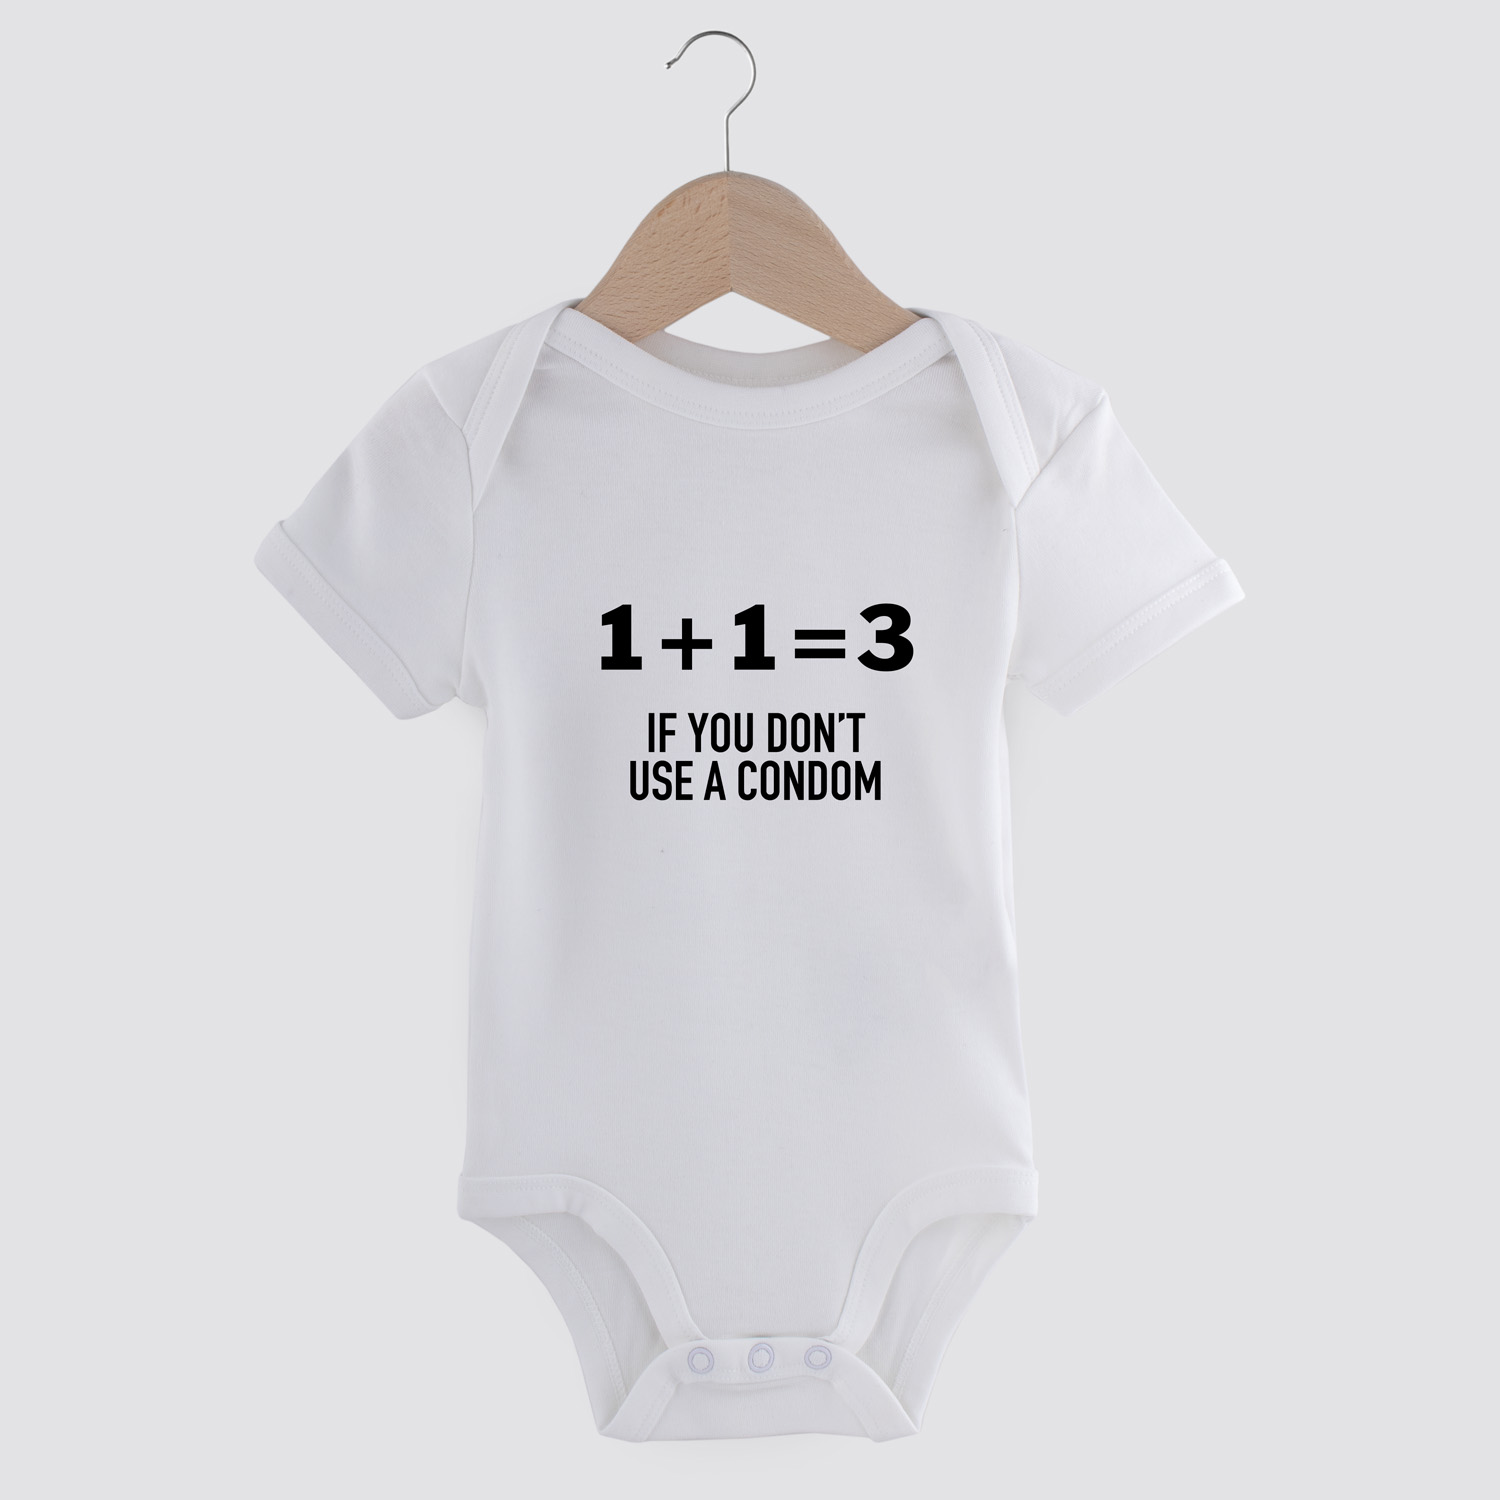 1+1=3 if you don't use a condom | Baby romper | my fabulous life.